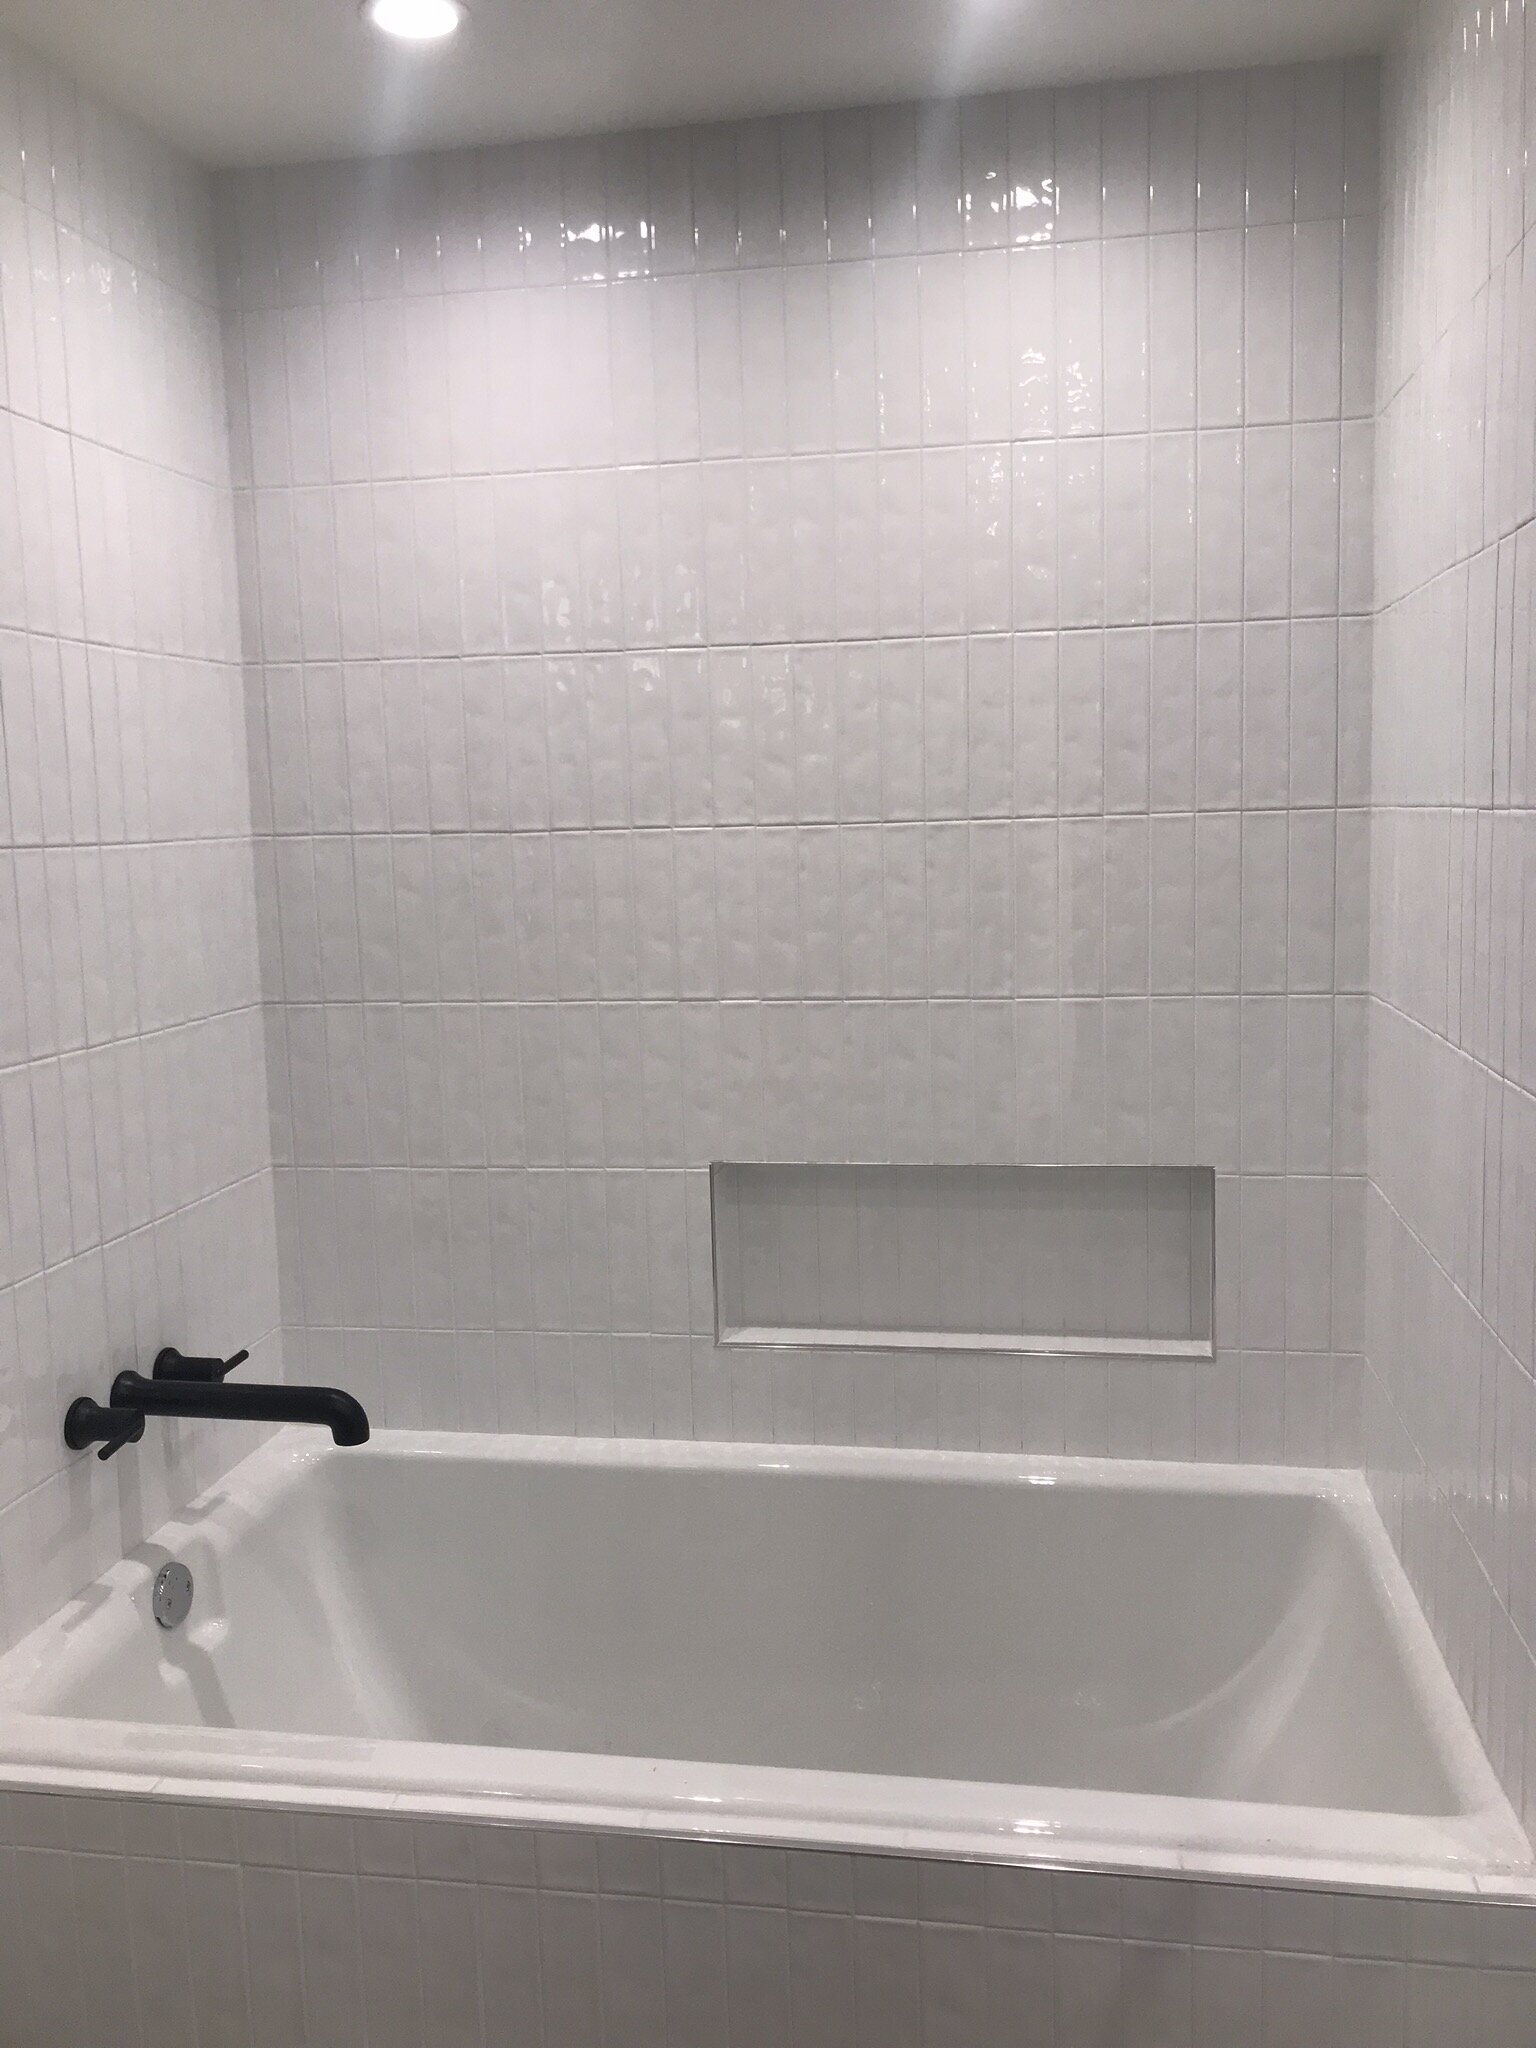 Reused the existing tub